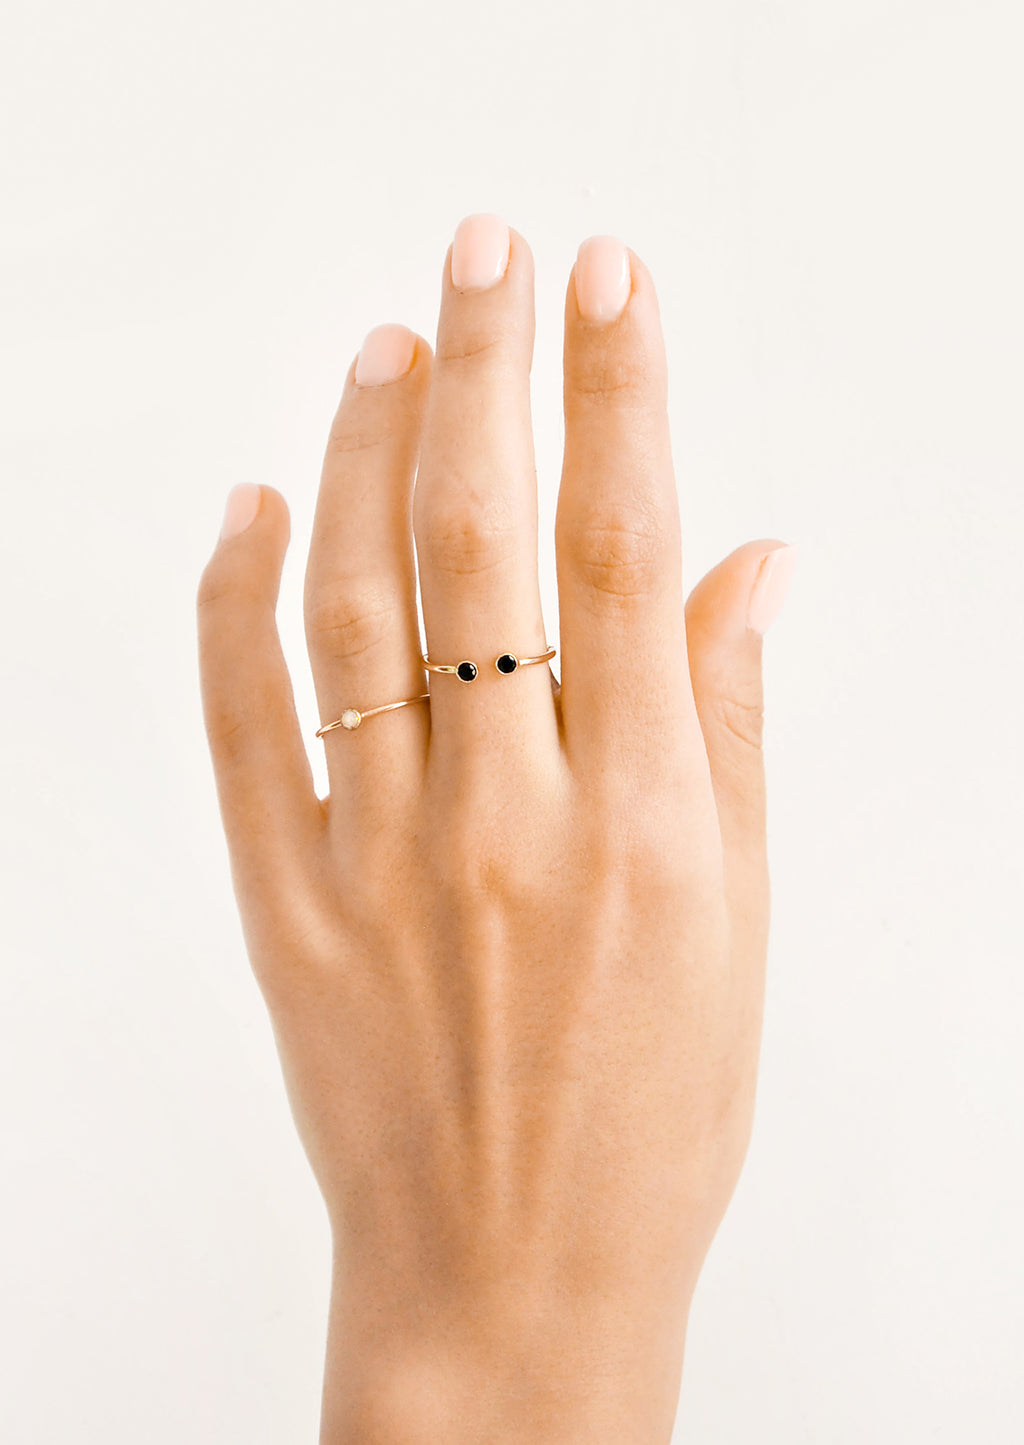 4: Model shot showing hand wearing two gold rings with stones.